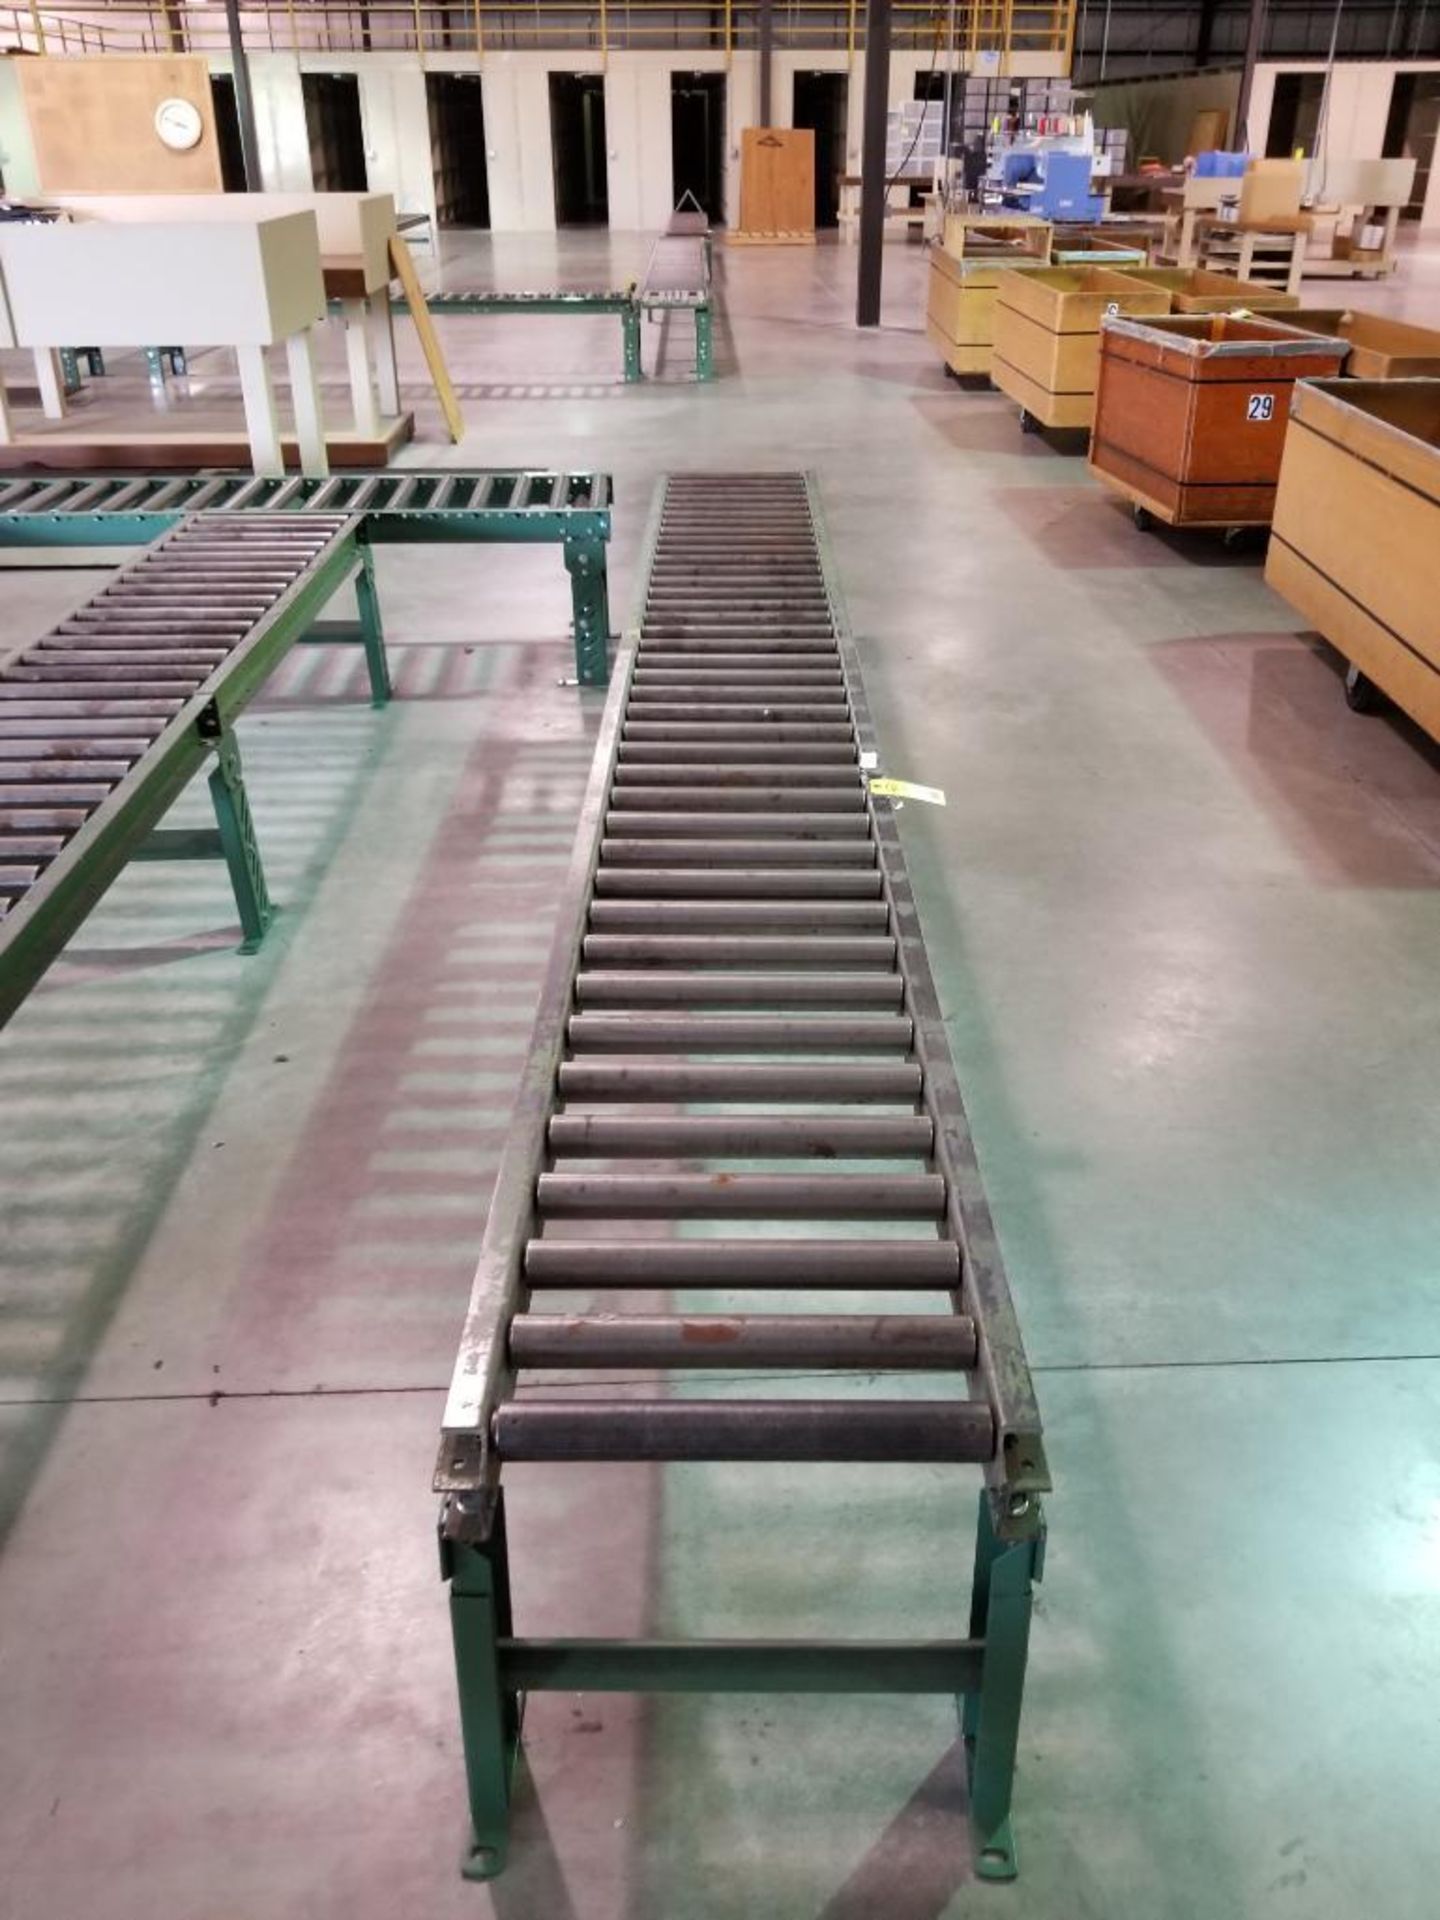 13ft roller conveyor section. 20in wide by 20in tall. (legs are adjustable to change height) - Image 2 of 2